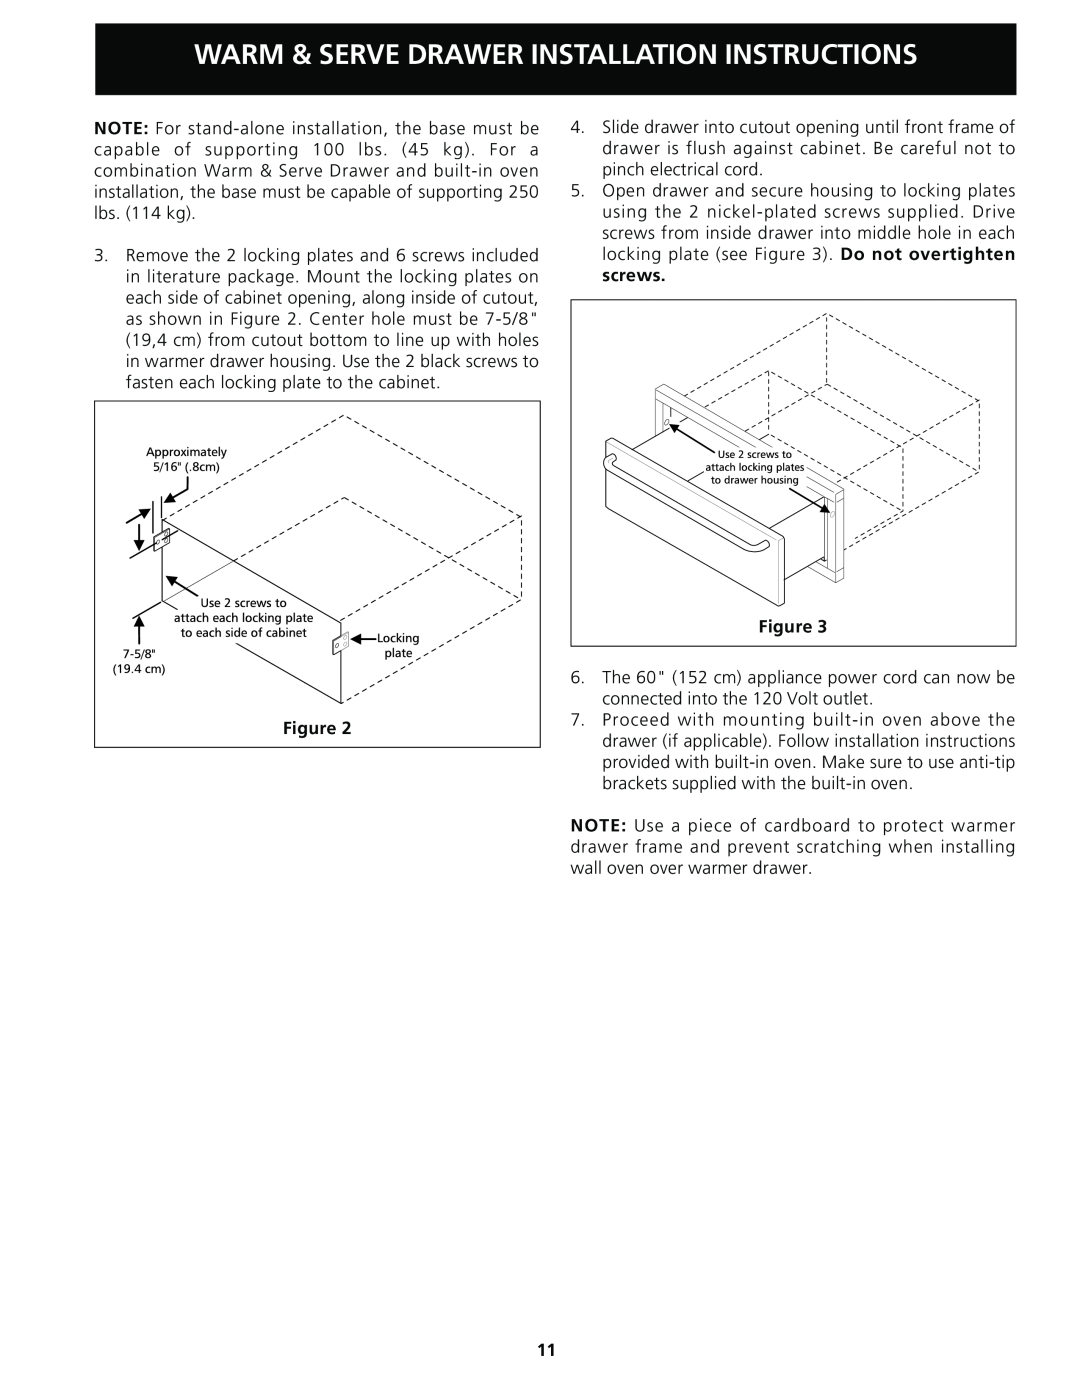 Frigidaire important safety instructions Warm & Serve Drawer Installation Instructions, Figure 